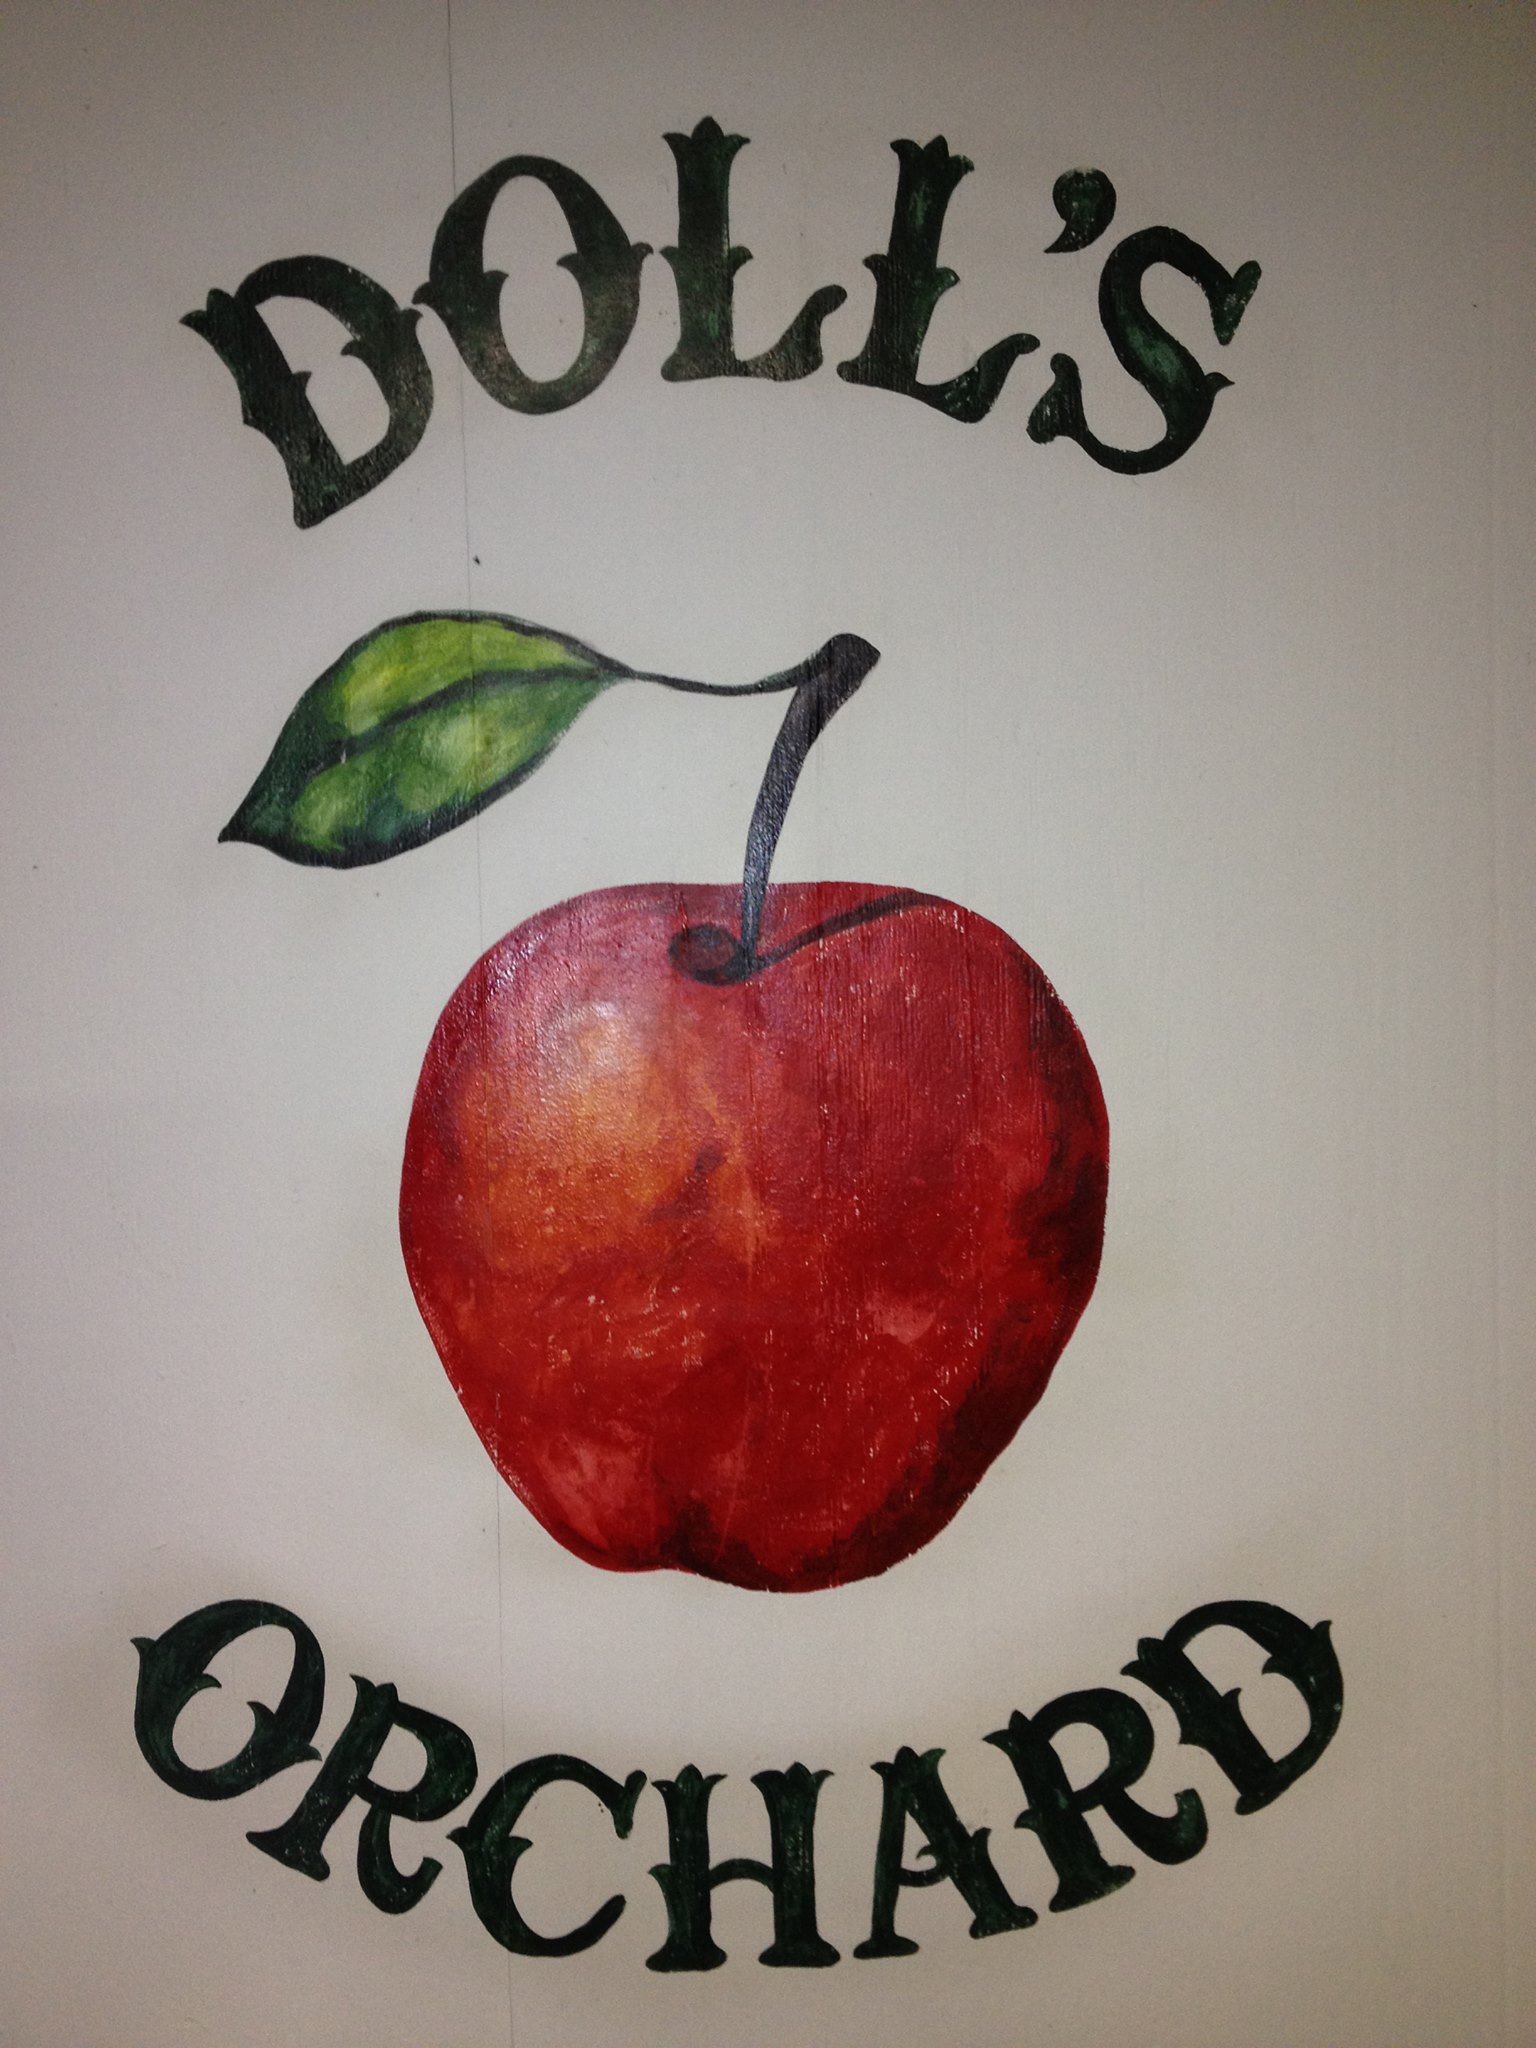 Doll's Orchard